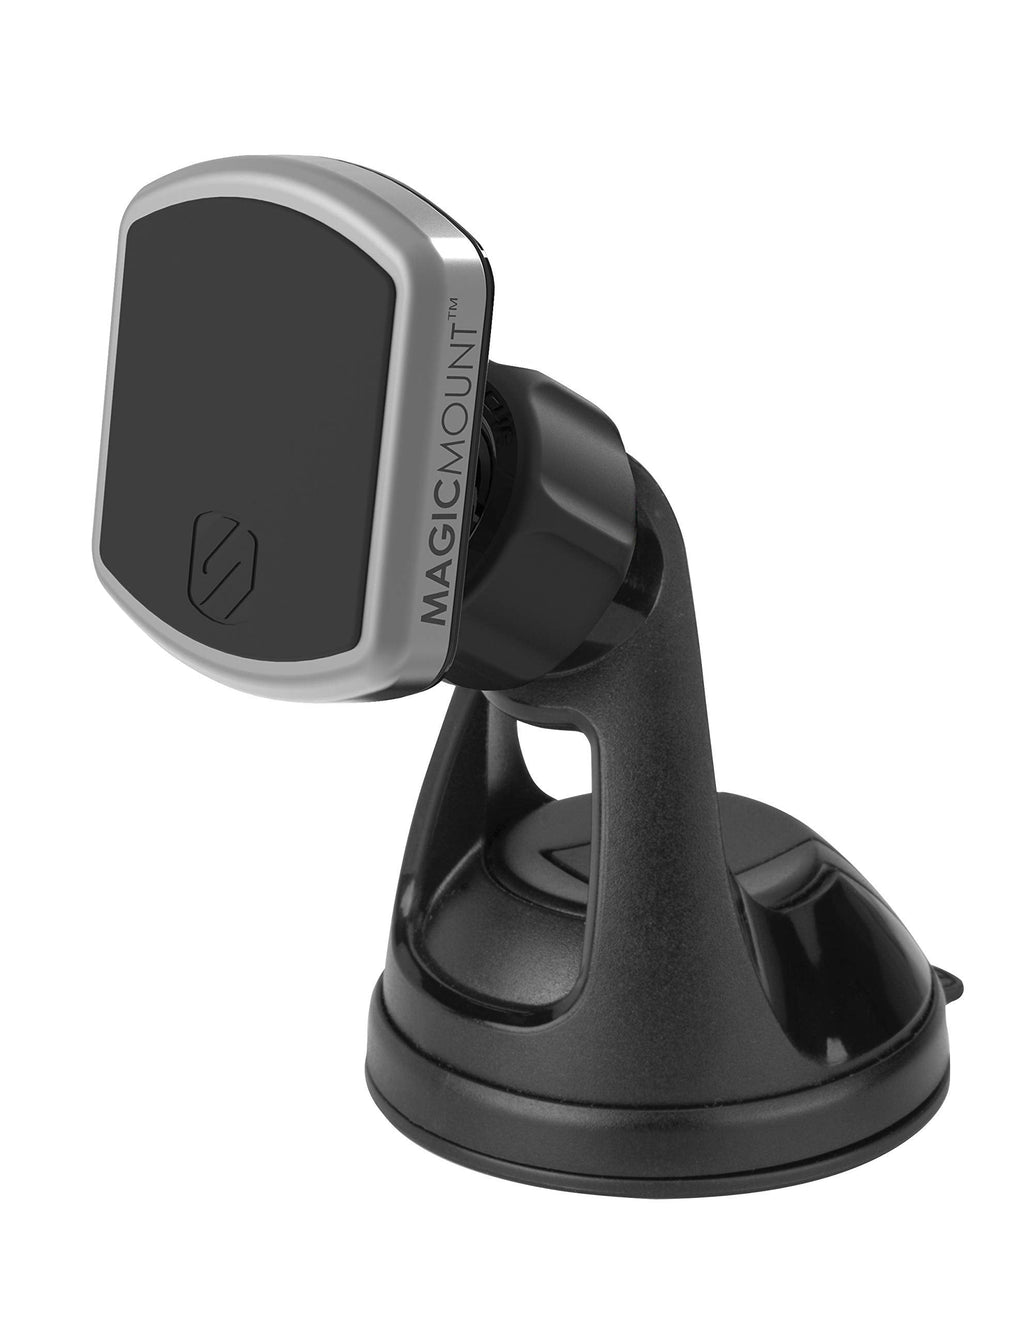  [AUSTRALIA] - Scosche MPWD2-XTPR MagicMount™ Pro Universal Magnetic Car Phone Holder Windshield or Dashboard Mount with Suction Cup, Home, Office, Black, Silver Window / Dash Suction Silver / Black